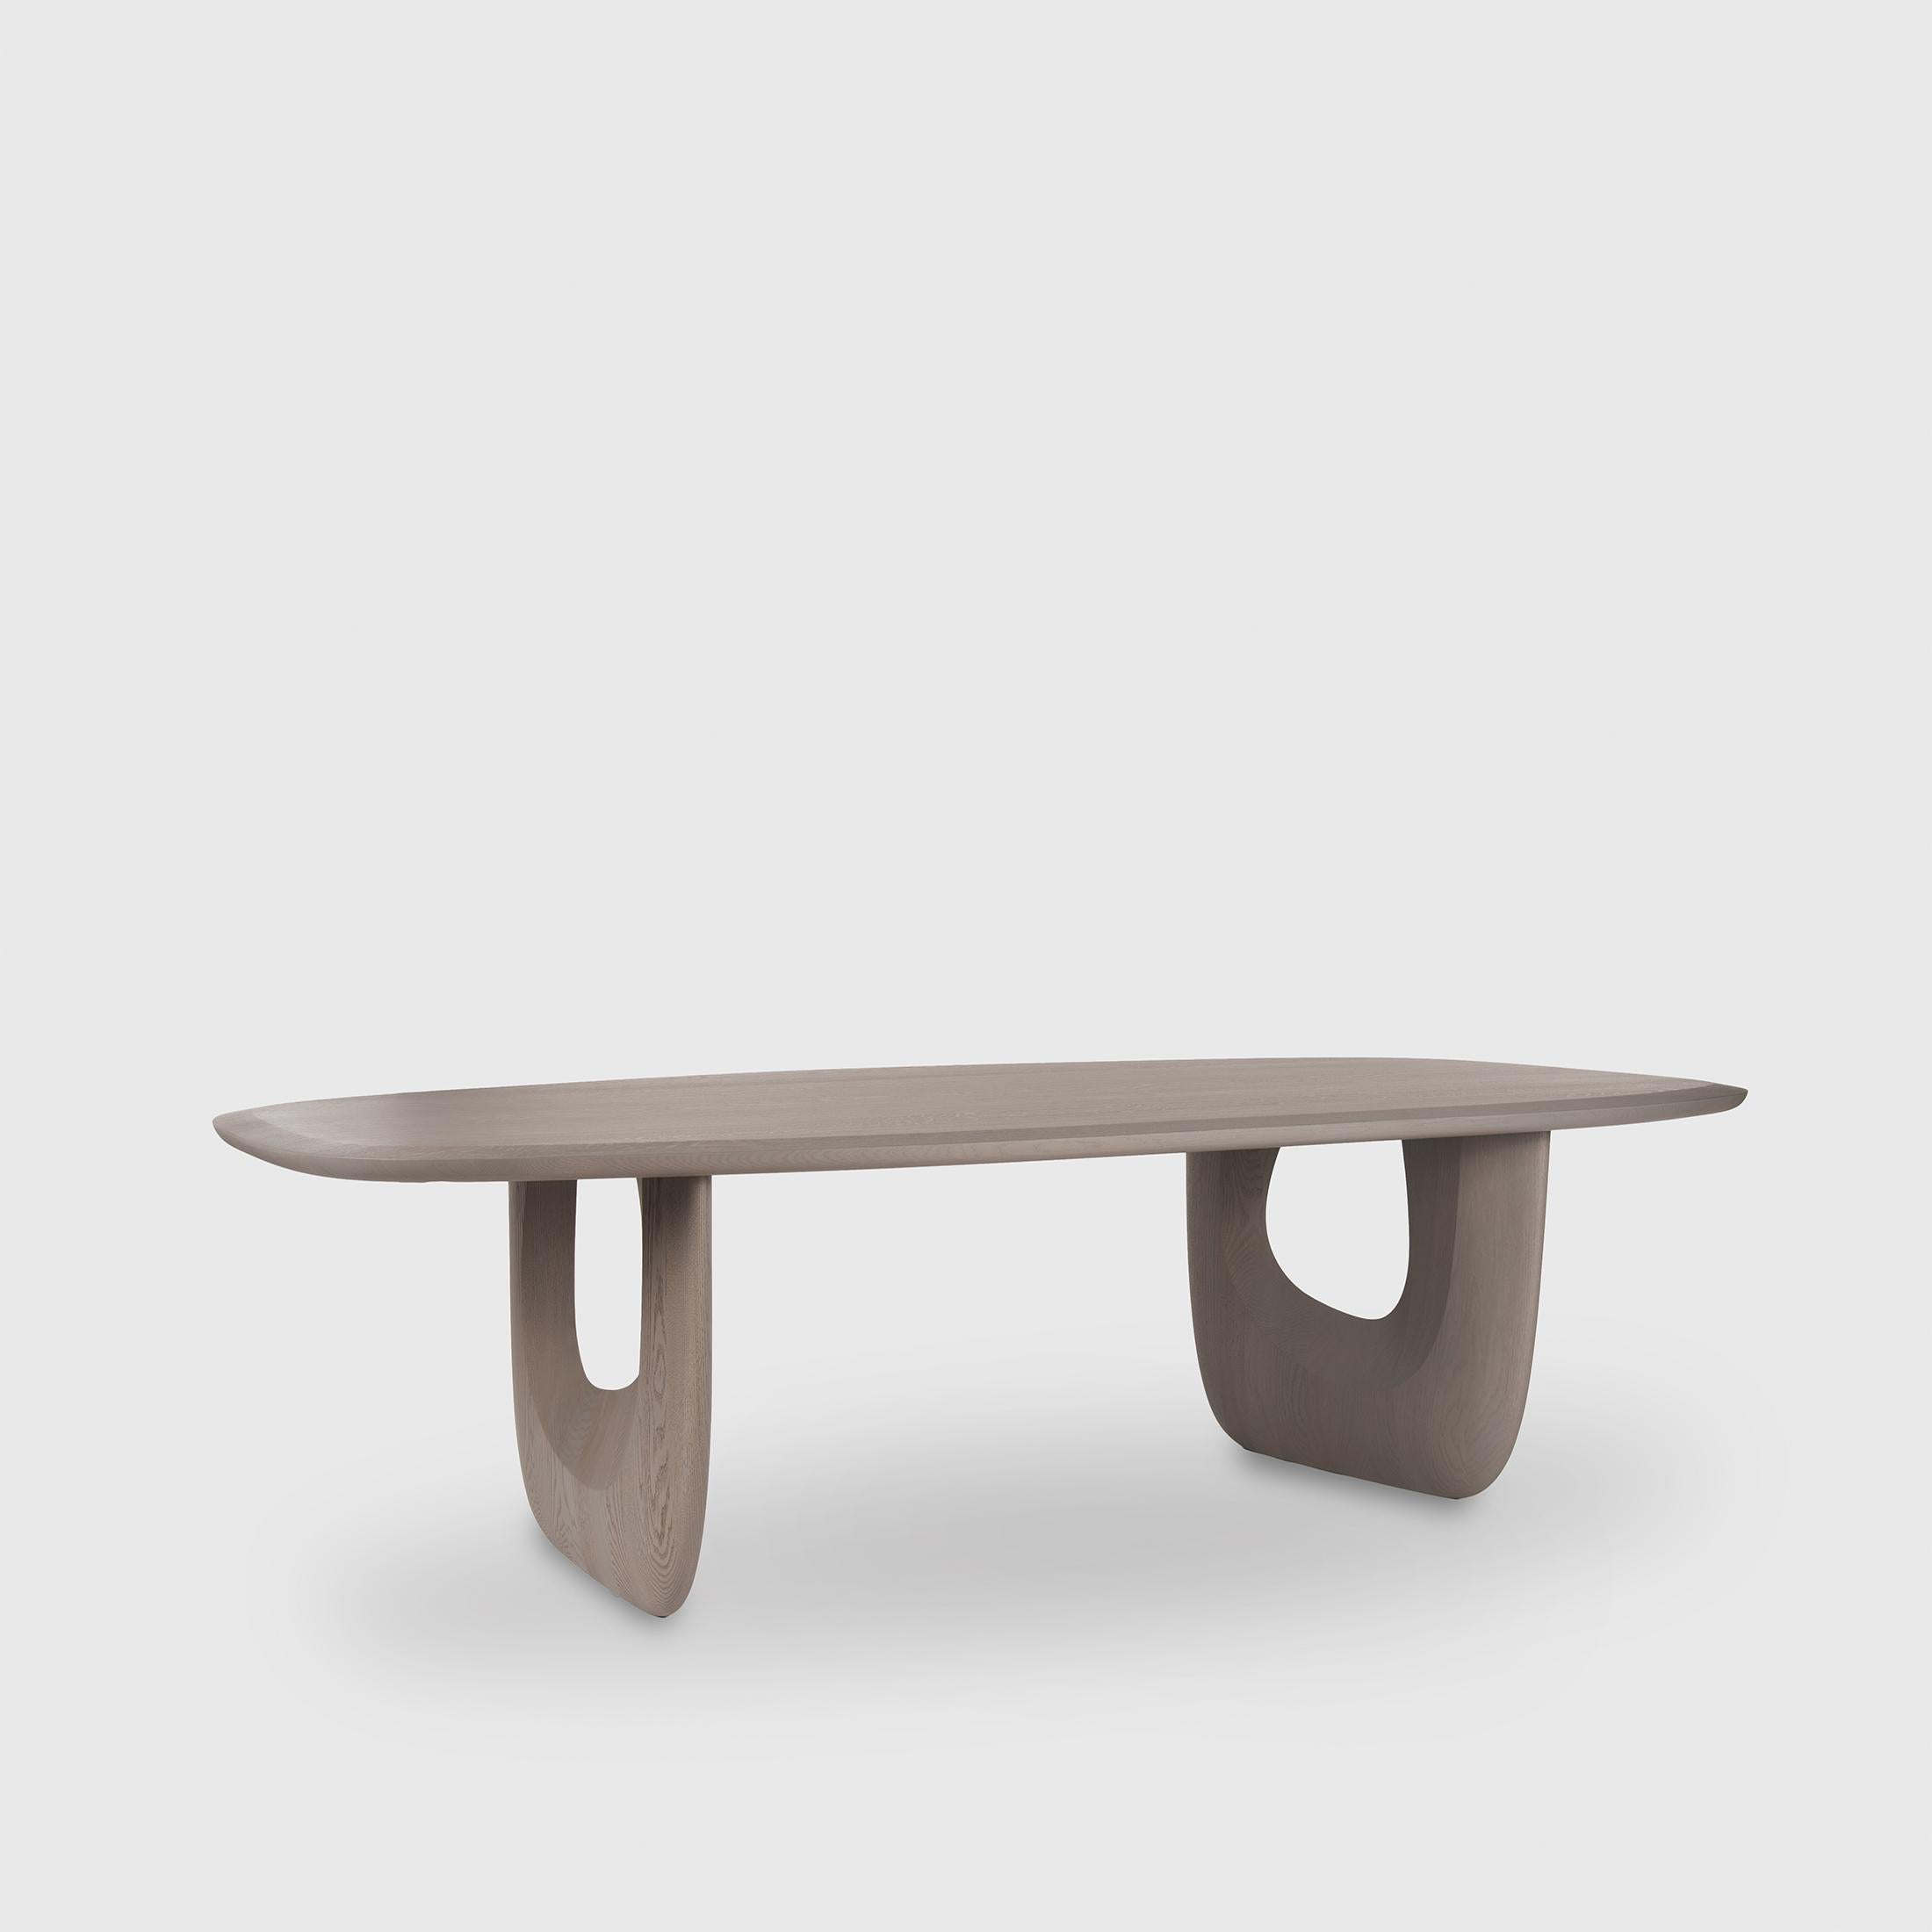 Dining Table 'Savignyplatz' by Man of Parts, Nude Oak, 260 cm For Sale 5